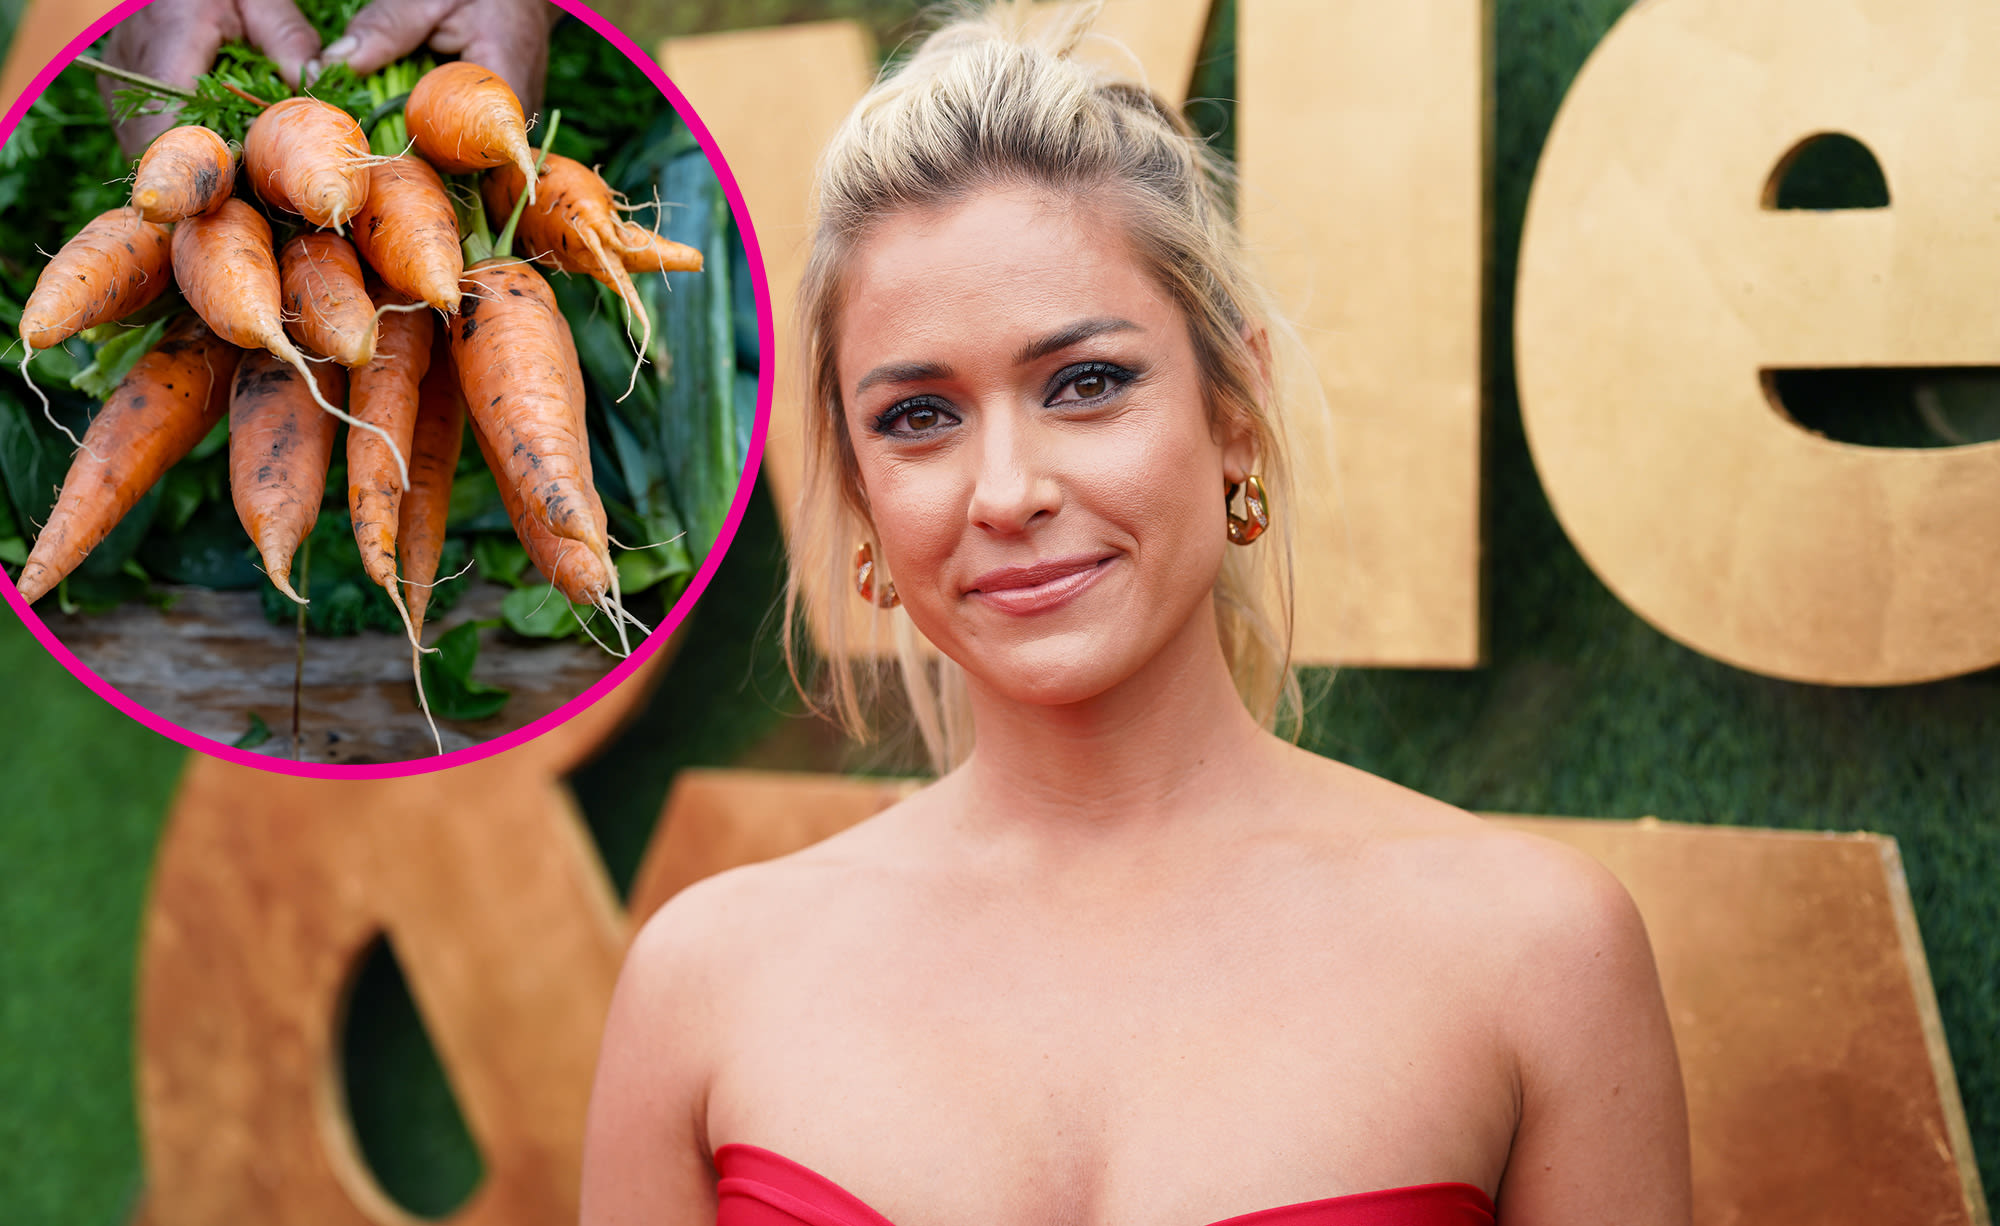 Kristin Cavallari Admits She Was ‘Afraid of Carrots’ During Intense Diet: ‘Messed Up My Metabolism’